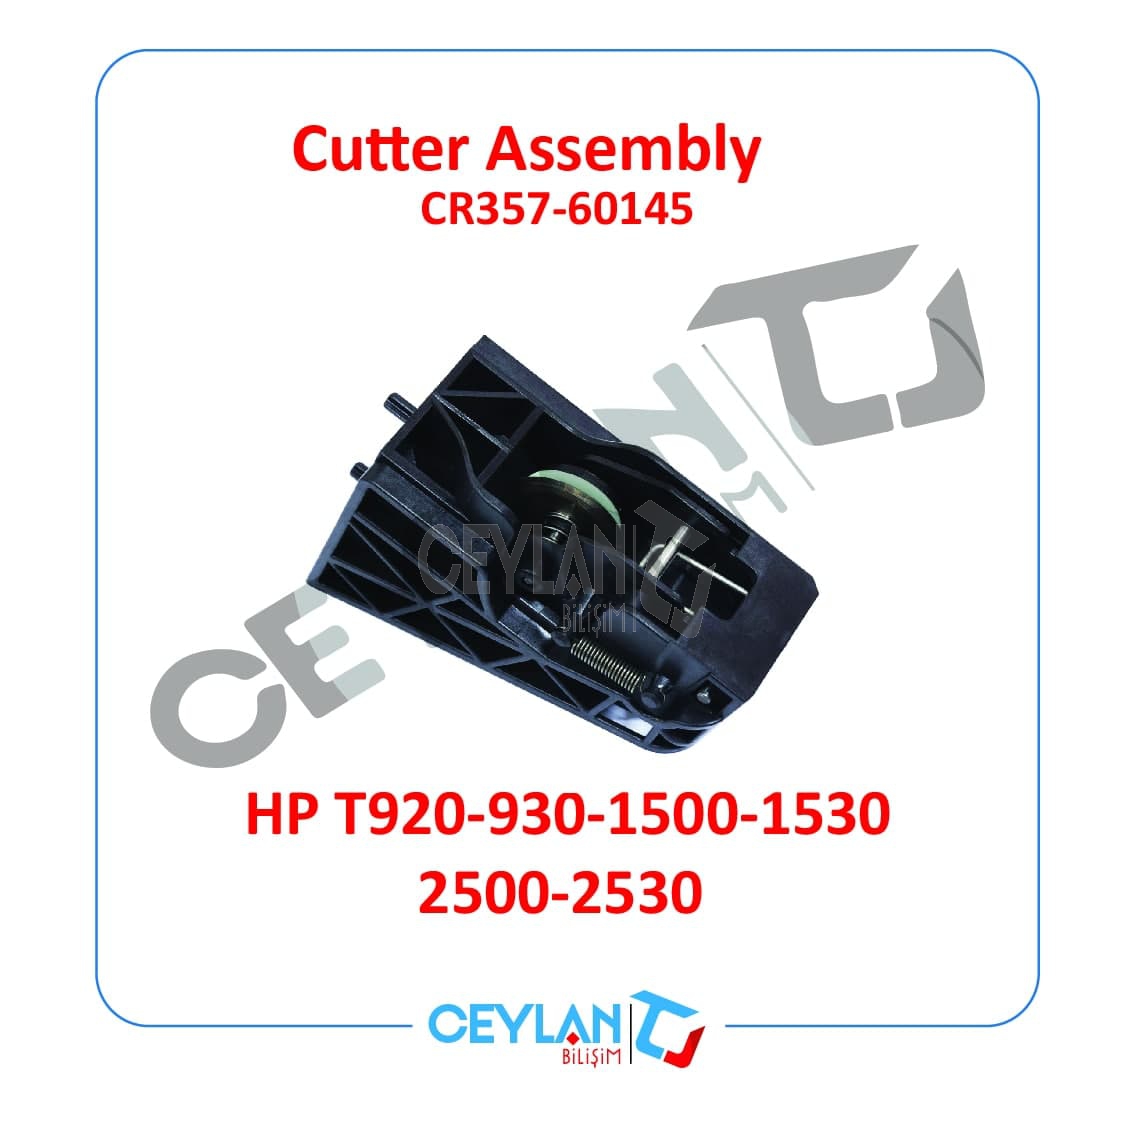 HP Cutter Assembly 